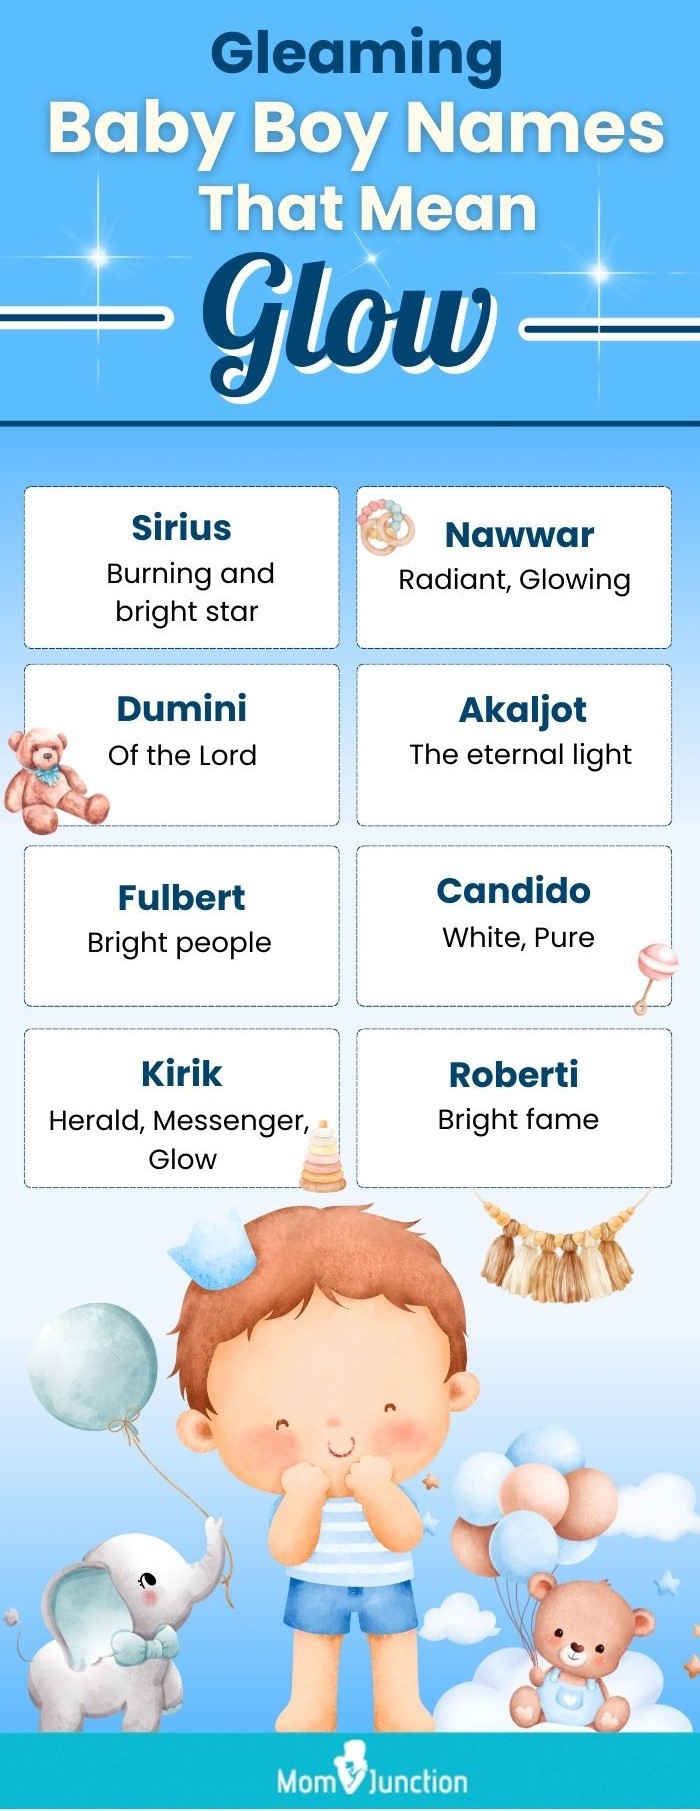 gleaming baby boy names that mean glow (infographic)